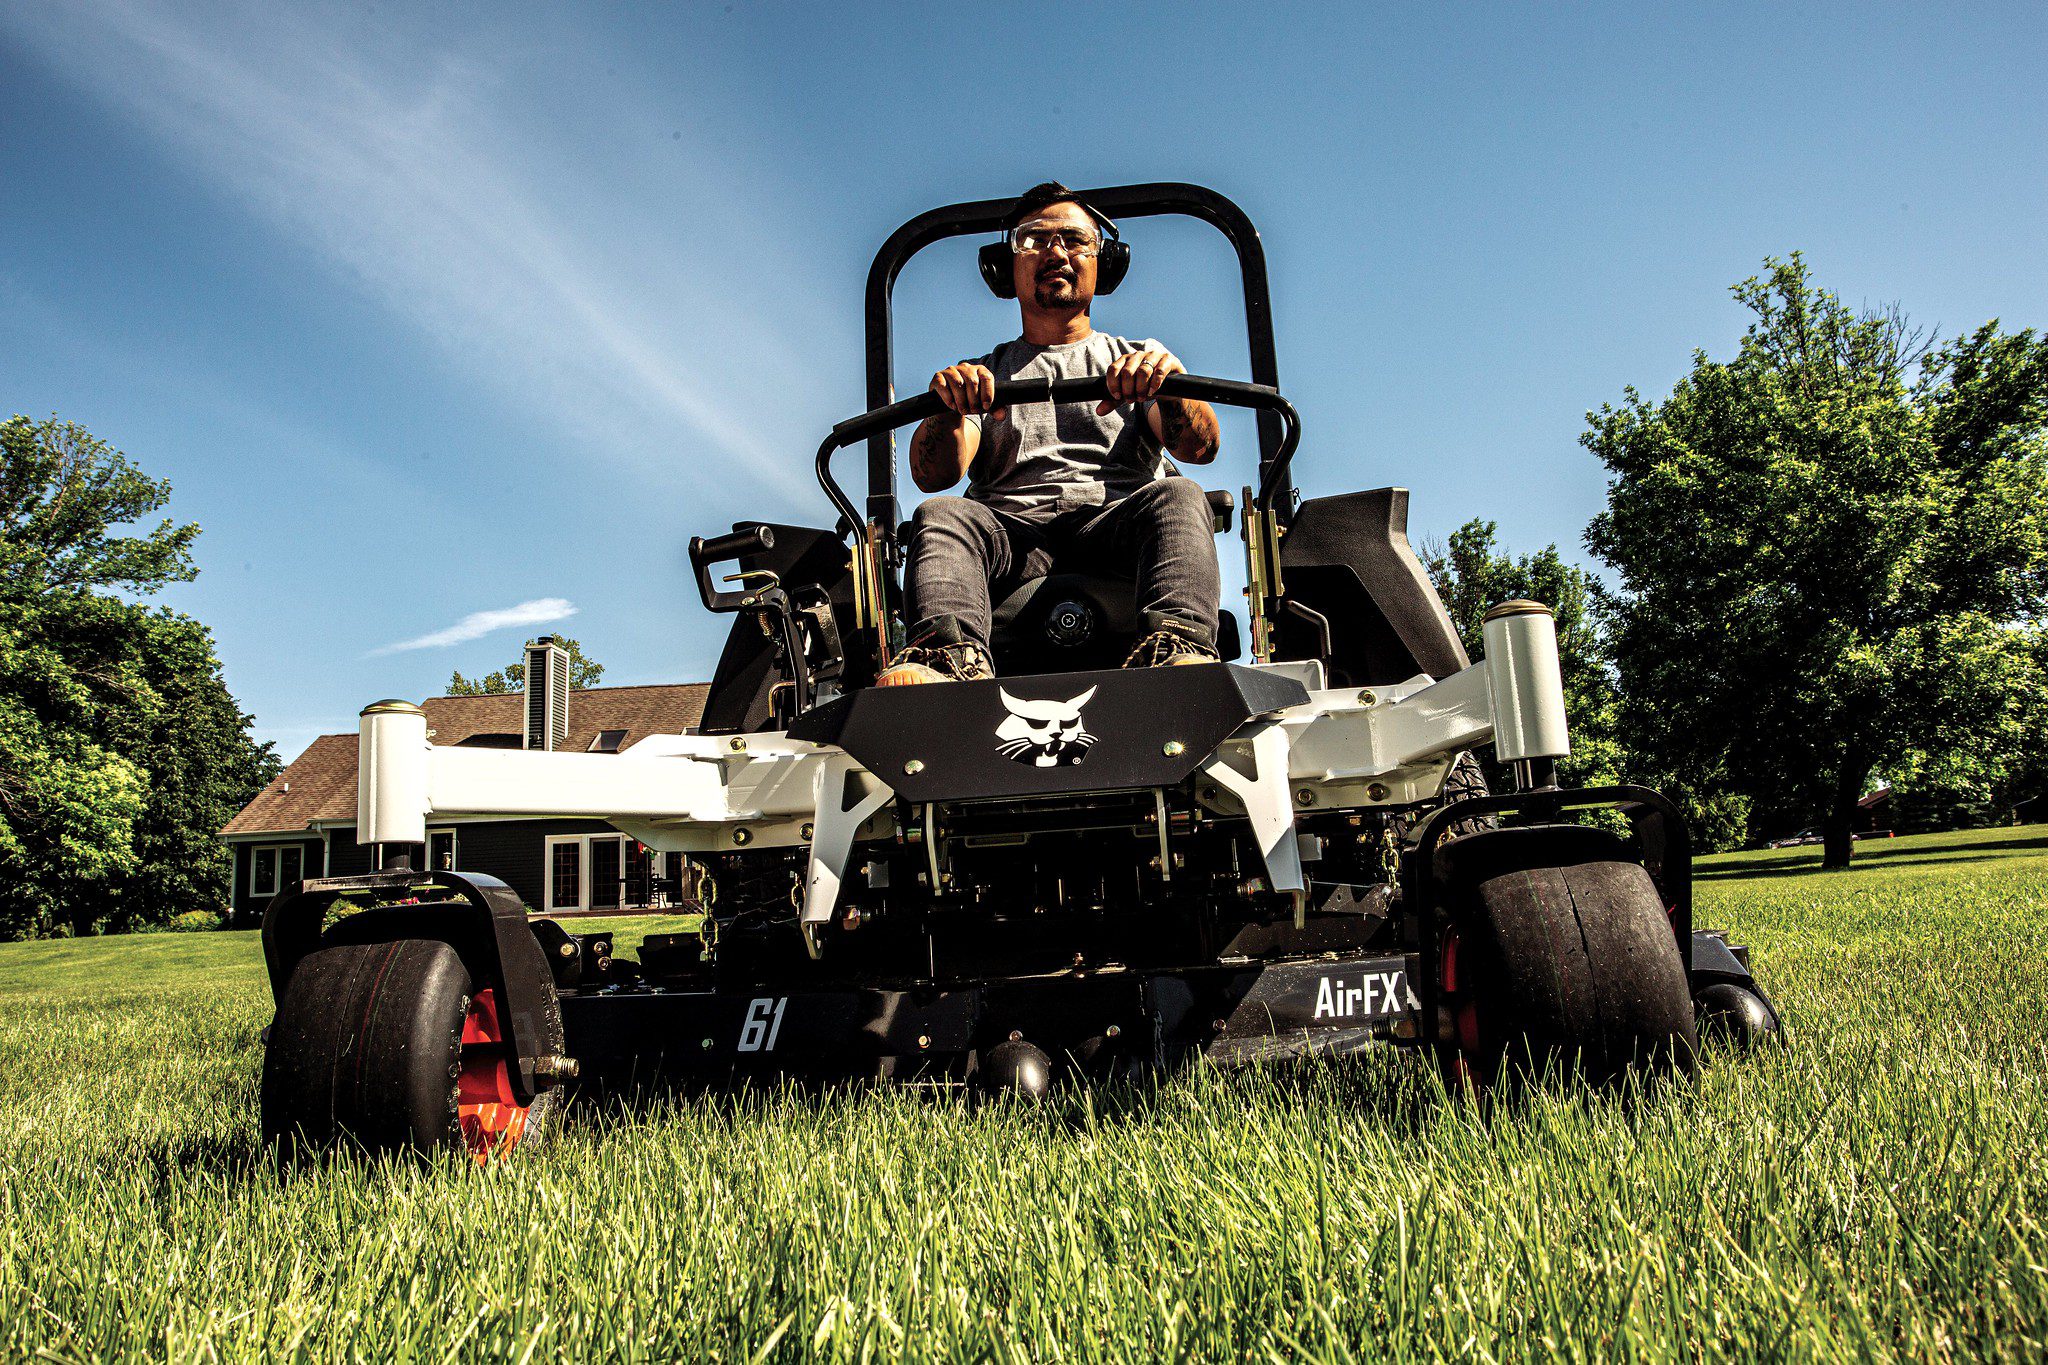 Browse Specs and more for the ZT6100 Zero-Turn Mower - Bobcat of Indy